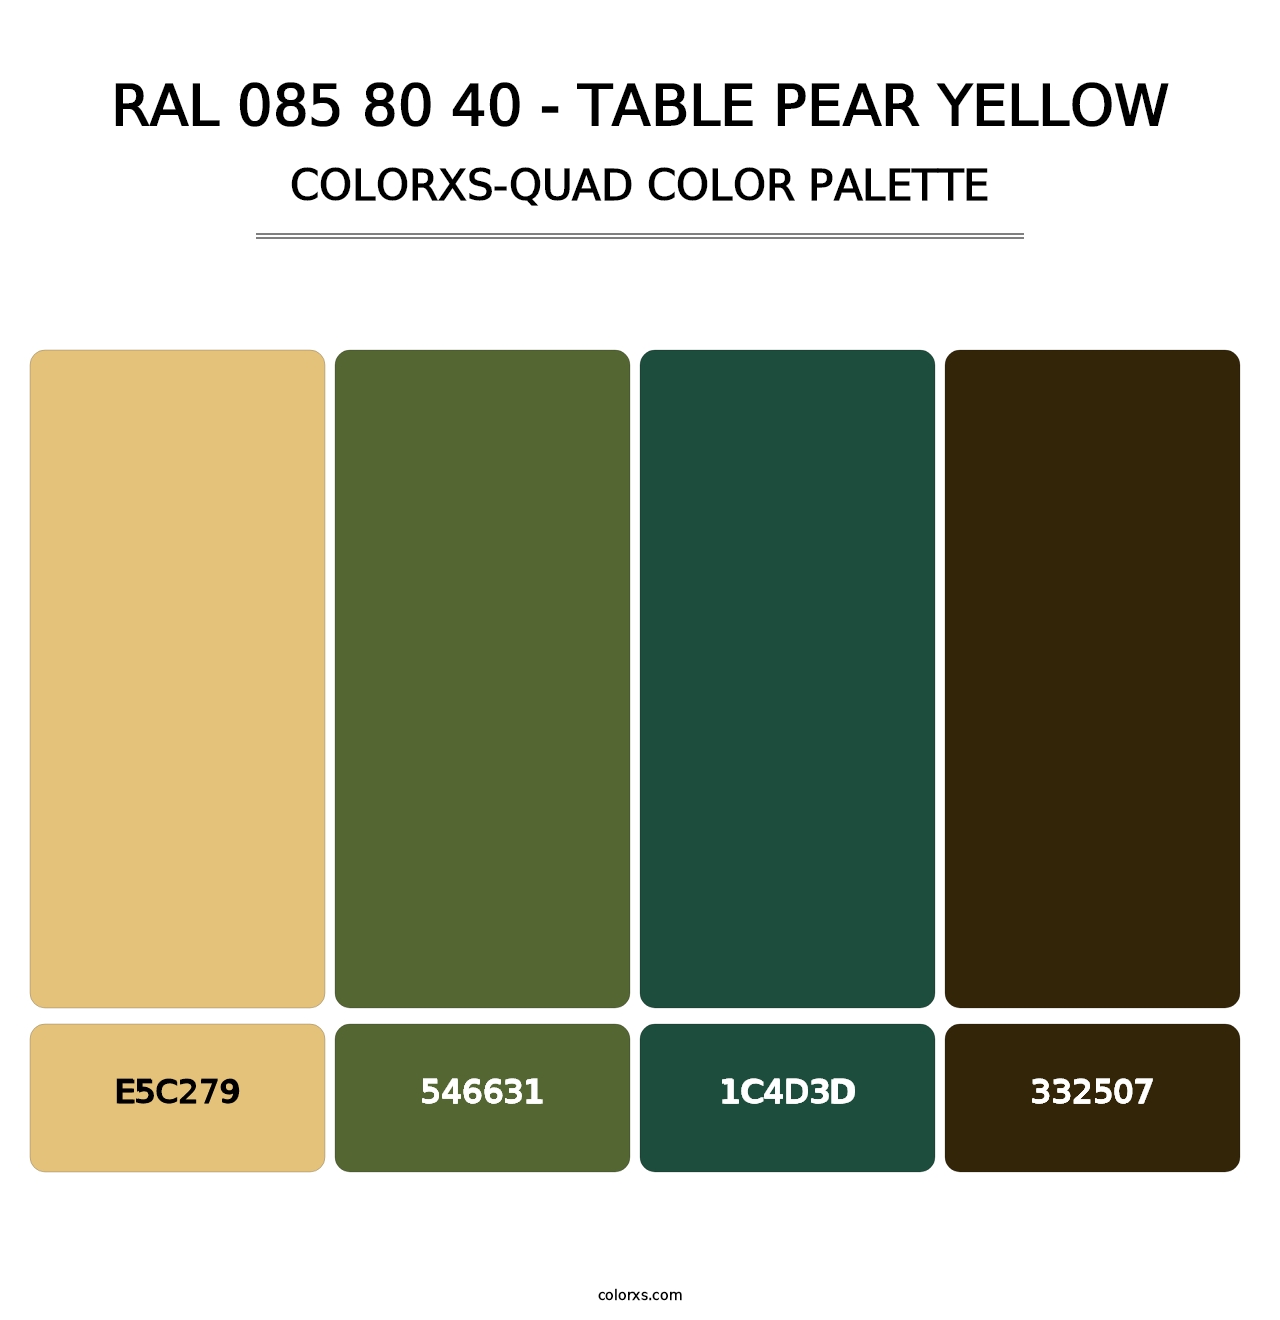 RAL 085 80 40 - Table Pear Yellow - Colorxs Quad Palette